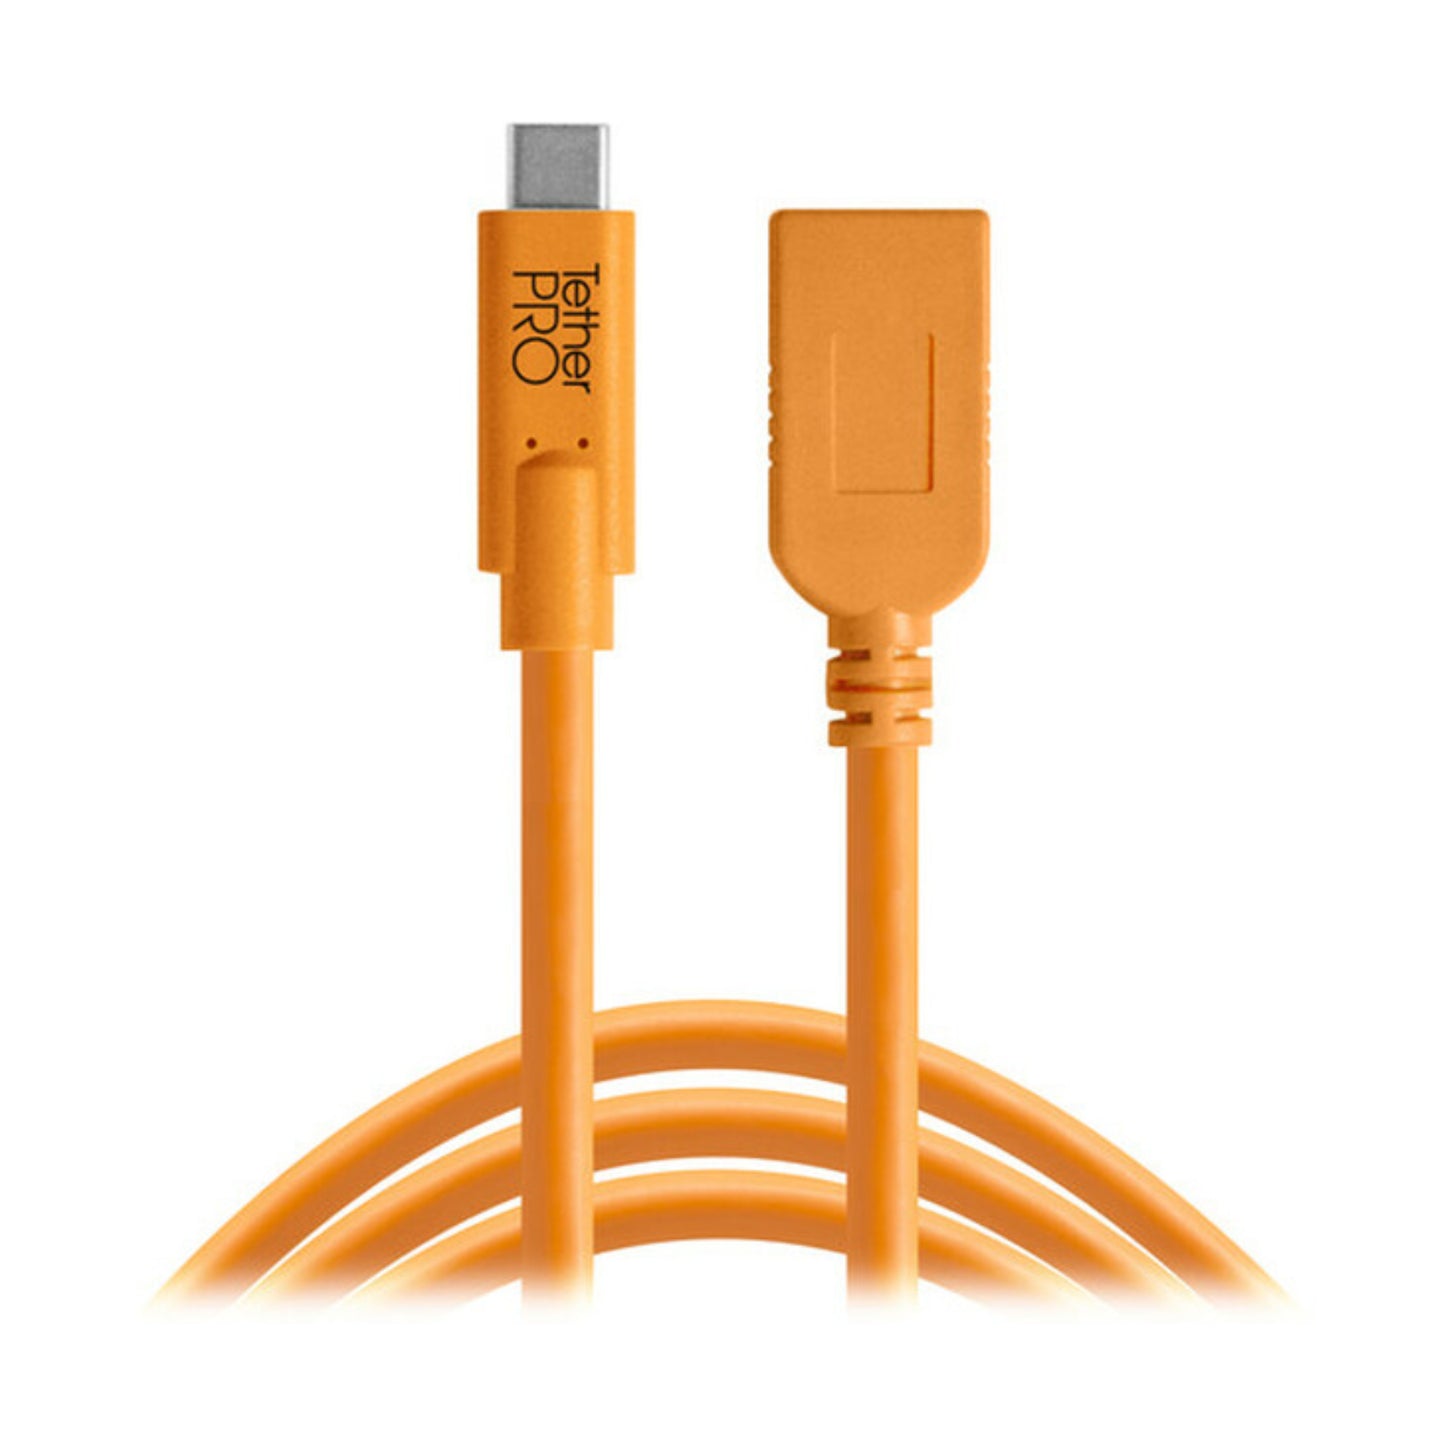 Tether Tools TetherPro USB Type-C to USB Type-A Extension Cable